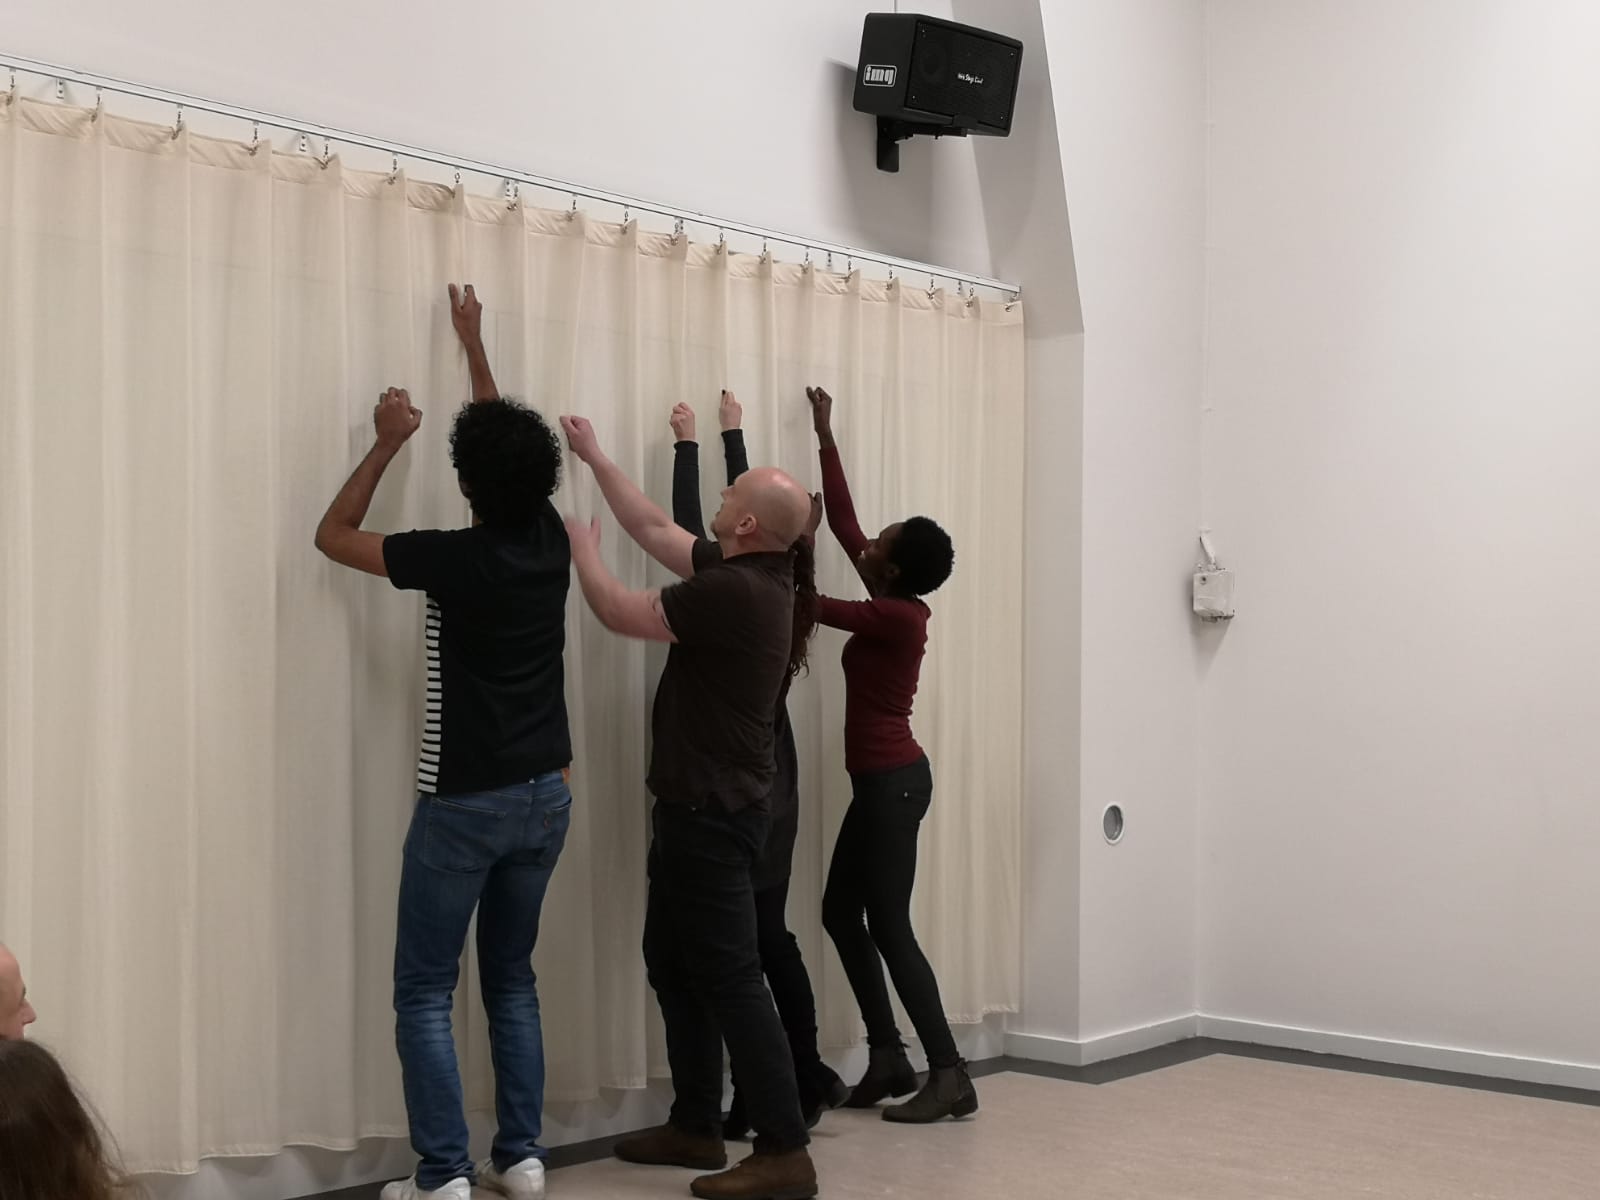 Acting Class Act Attack. A group of four people stand in a row, facing a curtain. Their arms reach up, like they want to bring down the curtain.